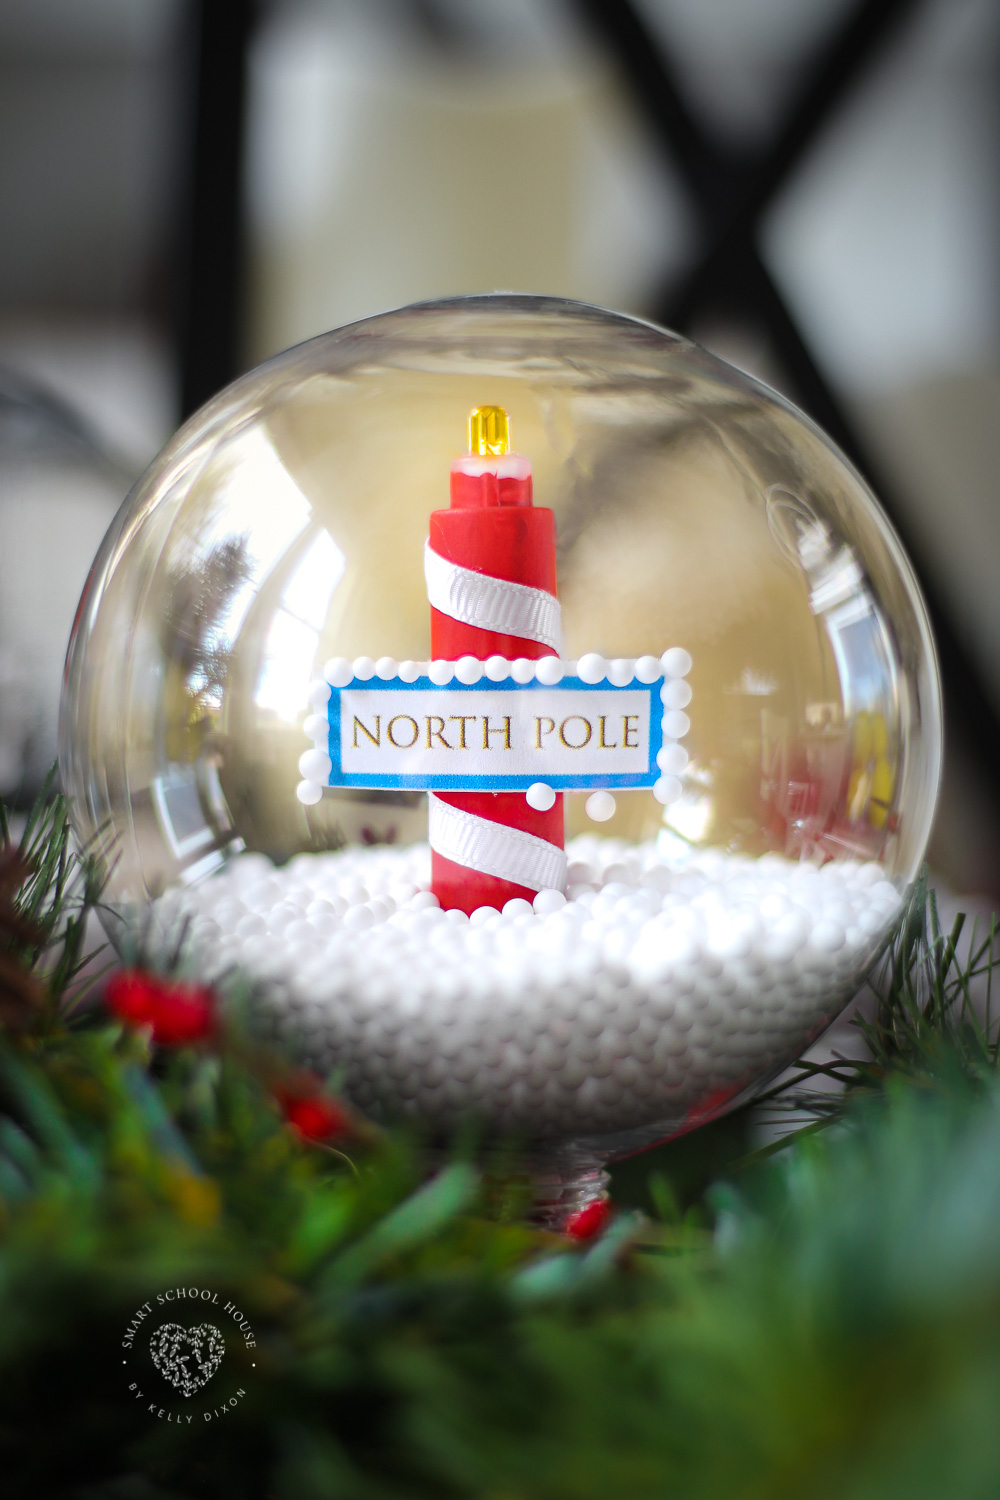 DIY Glowing Solar North Pole Snow Globe Made With a Plastic Ornament for Christmas